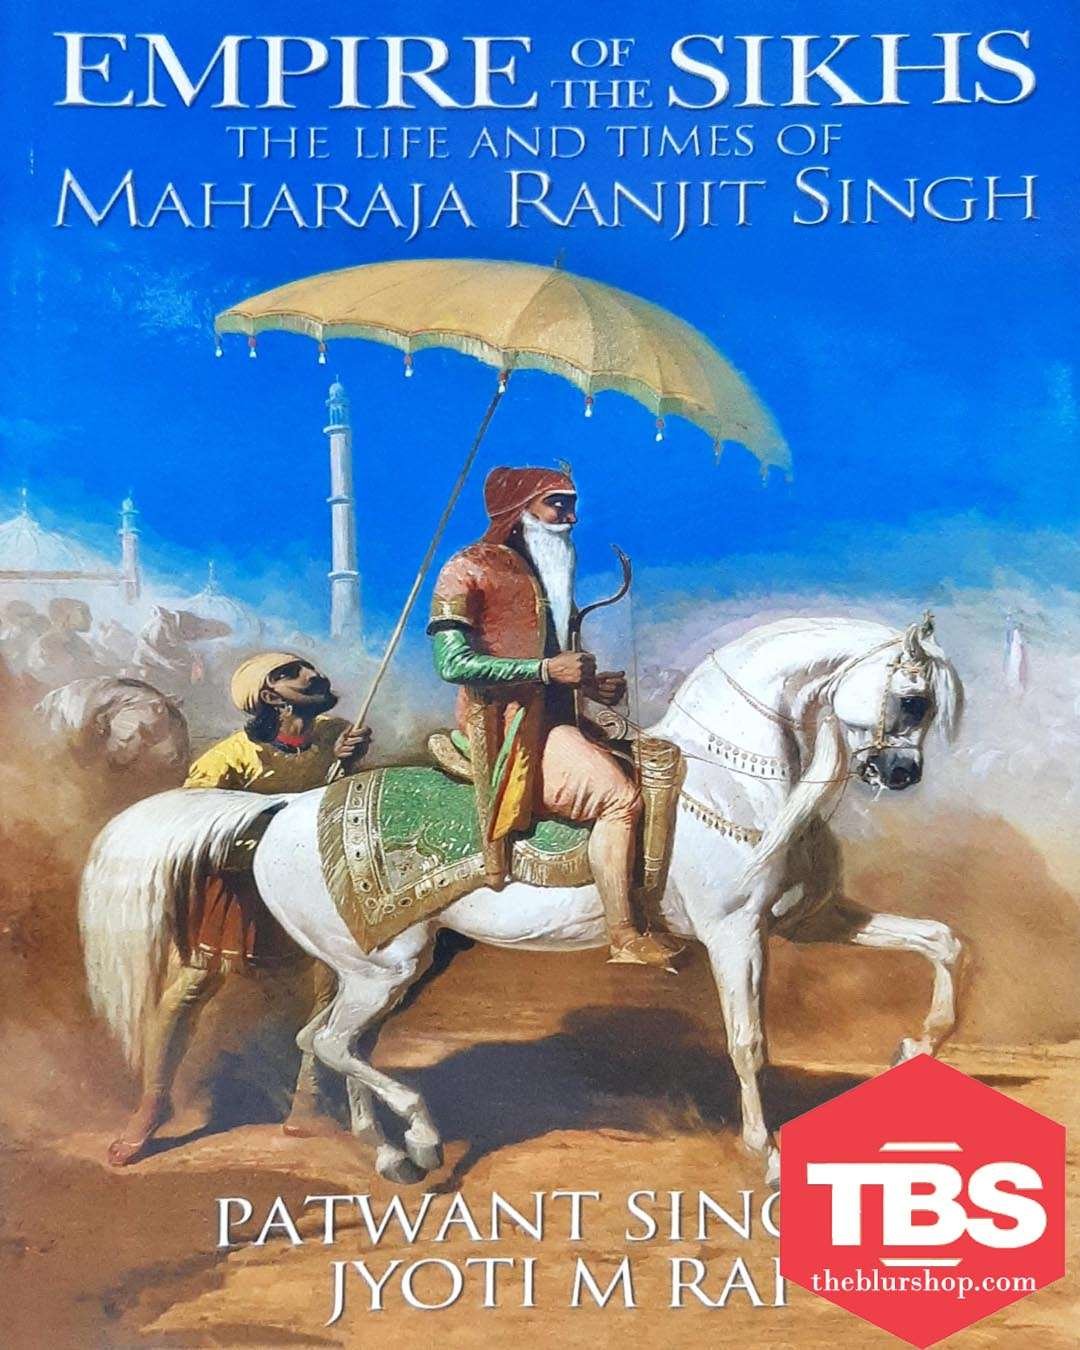 Empire of The Sikhs: The Life And Times of Maharaja Ranjit Singh